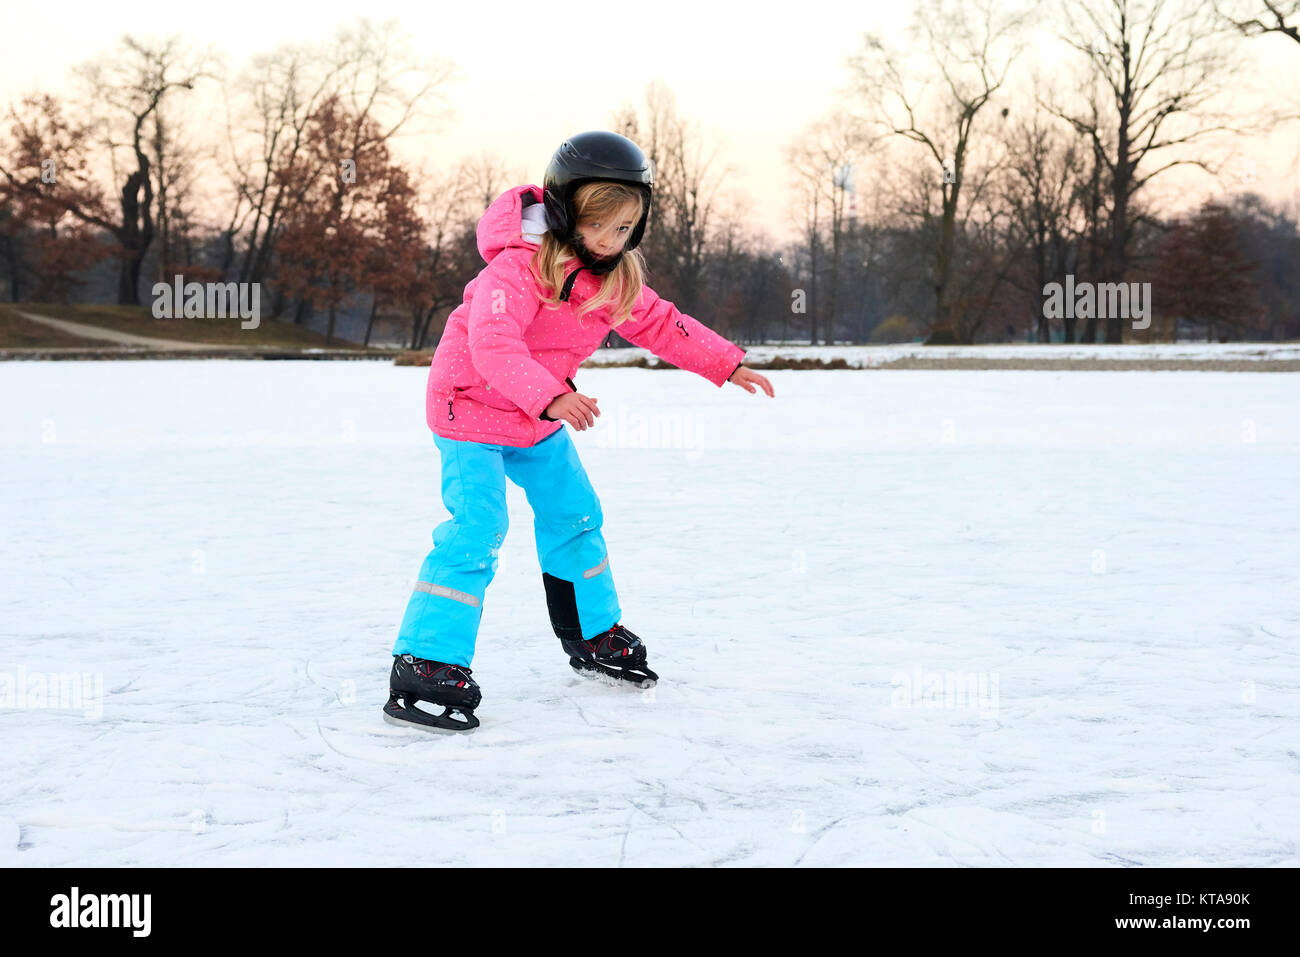 Child girl falling down on ice in snowy park during winter holidays. Wearing safety helmet. Winter children activities. Stock Photo